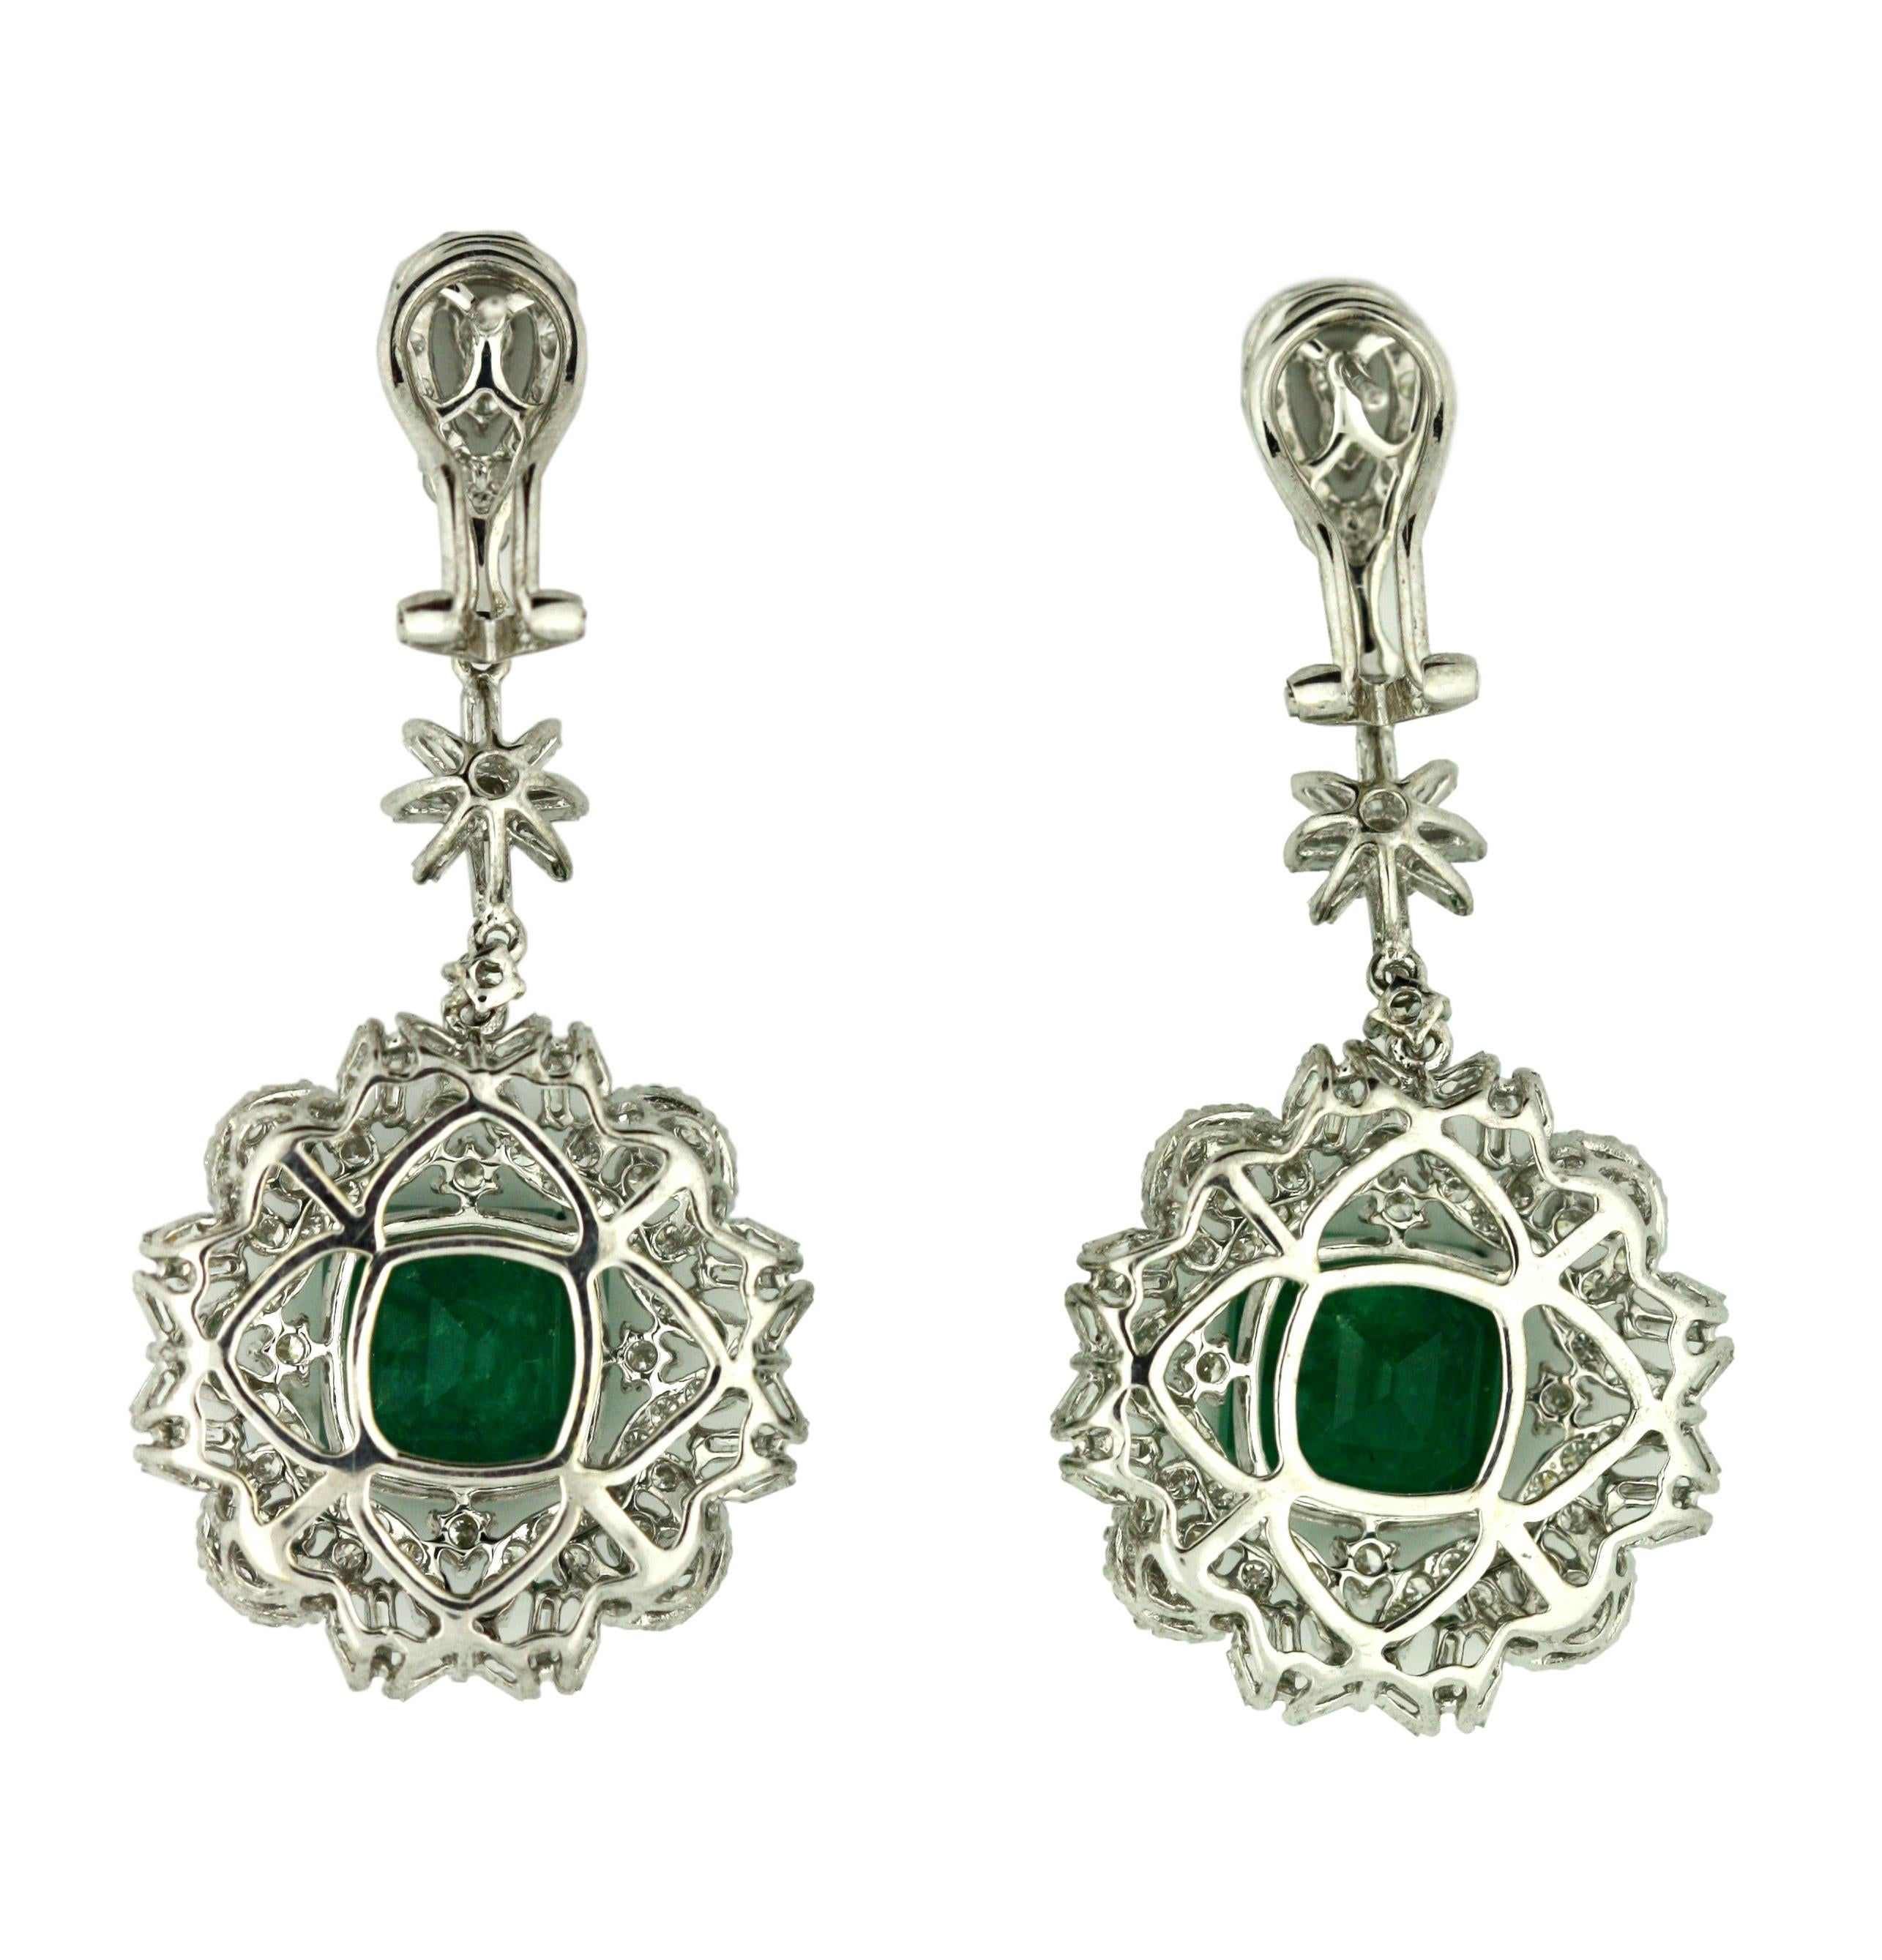 18K Emerald and Diamond Earrings 
Set with two octagonal step-cut emeralds weighing approximately 8.28 carats, framed within a surround of and topped by two hundred thirty-six round diamonds weighing approximately 3.84 carats. 
Measuring 9.28 x 9.25